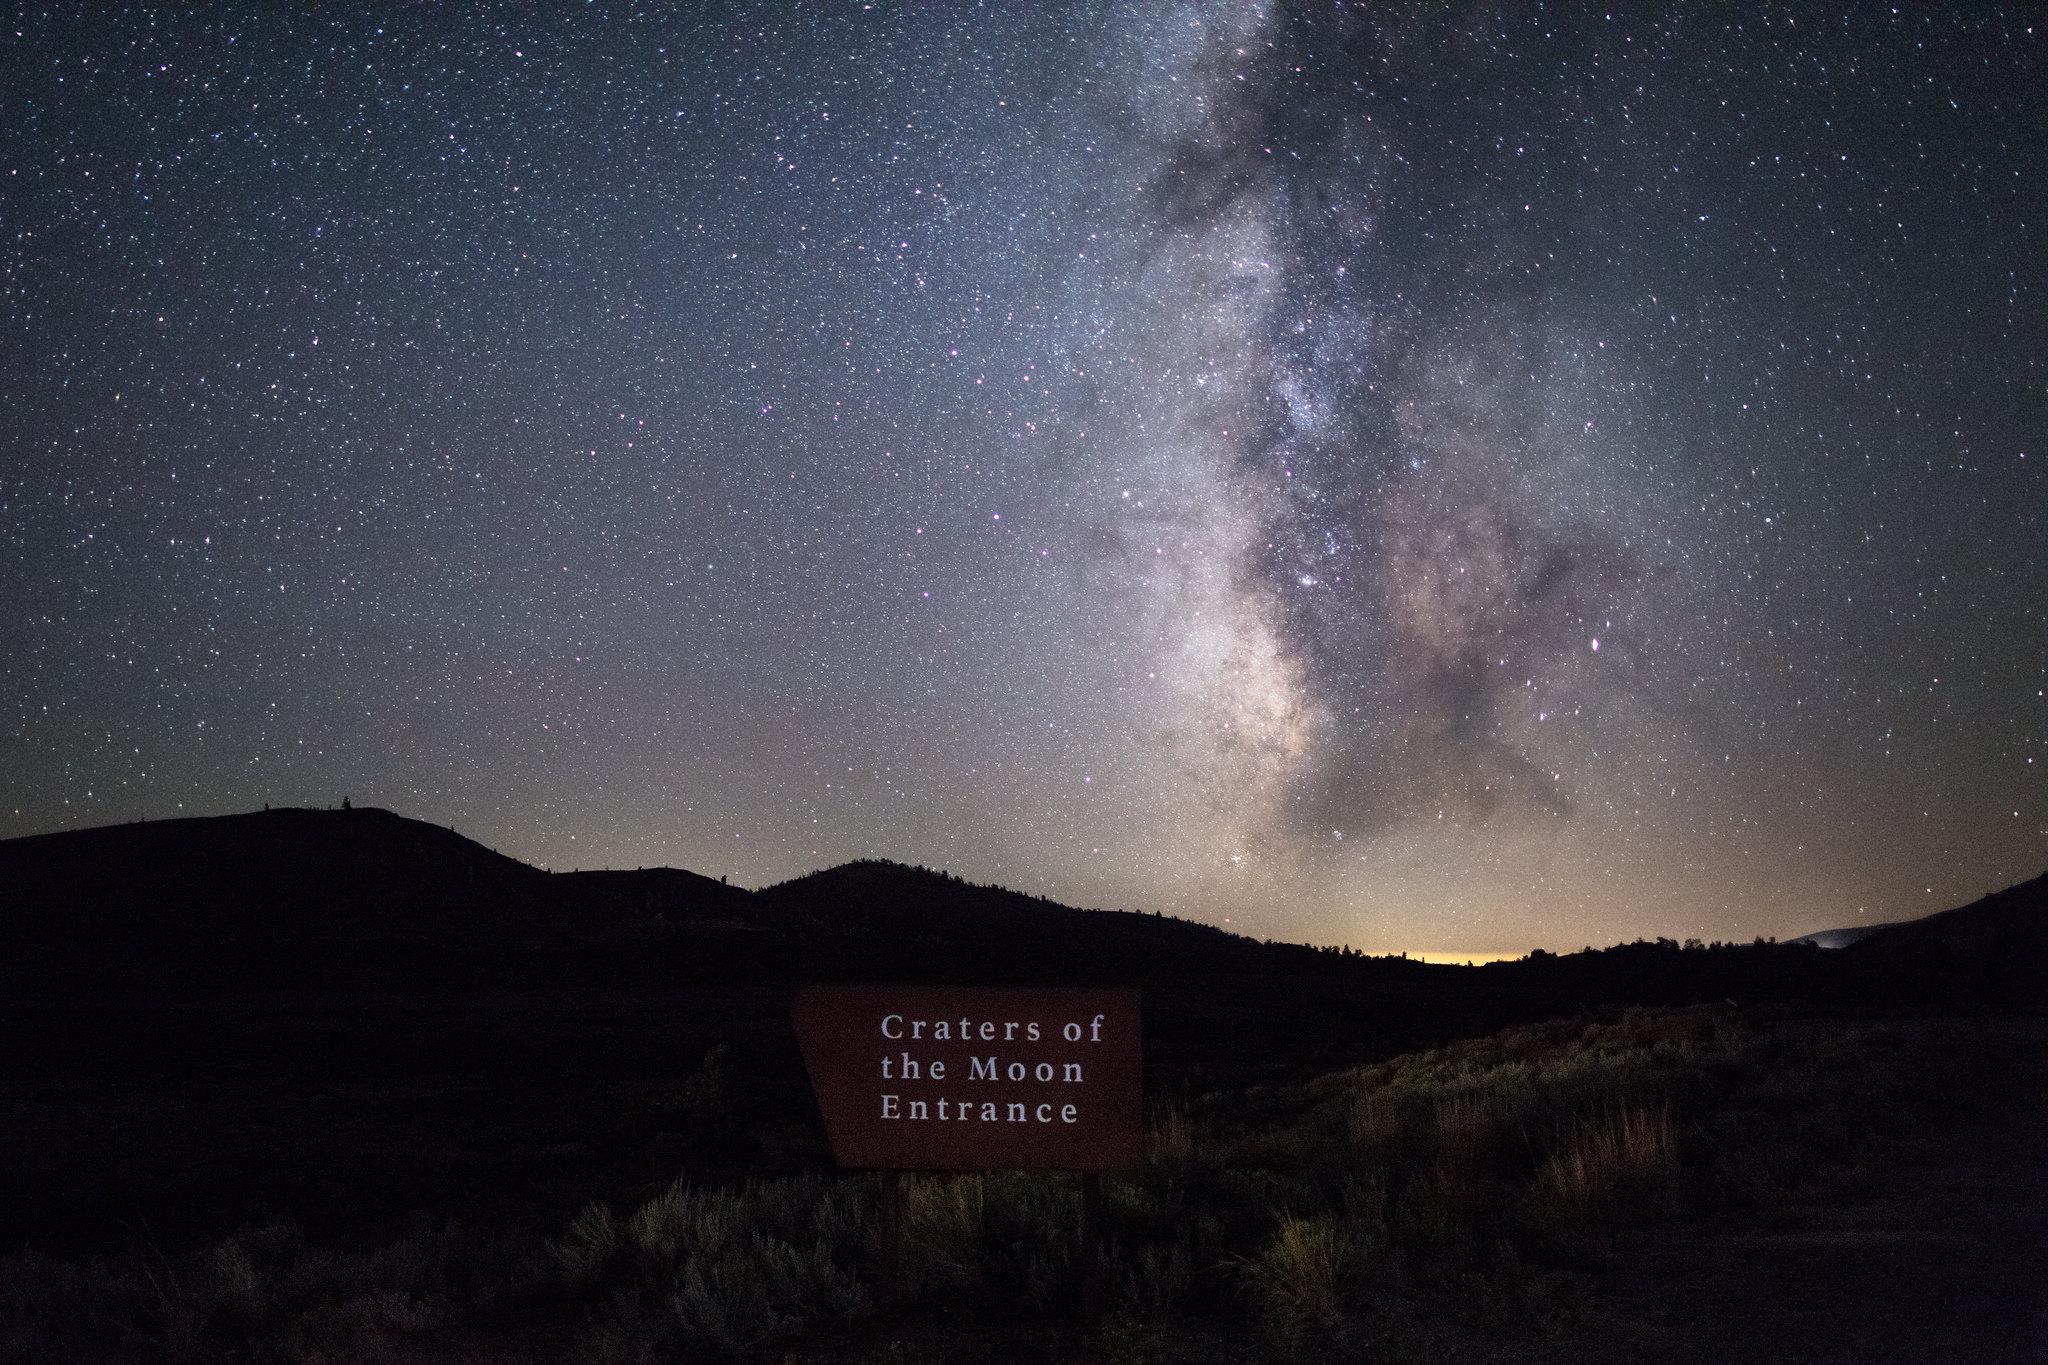 The Craters entrance sign sits below a starry night sky, with the milky way brightly-lit.